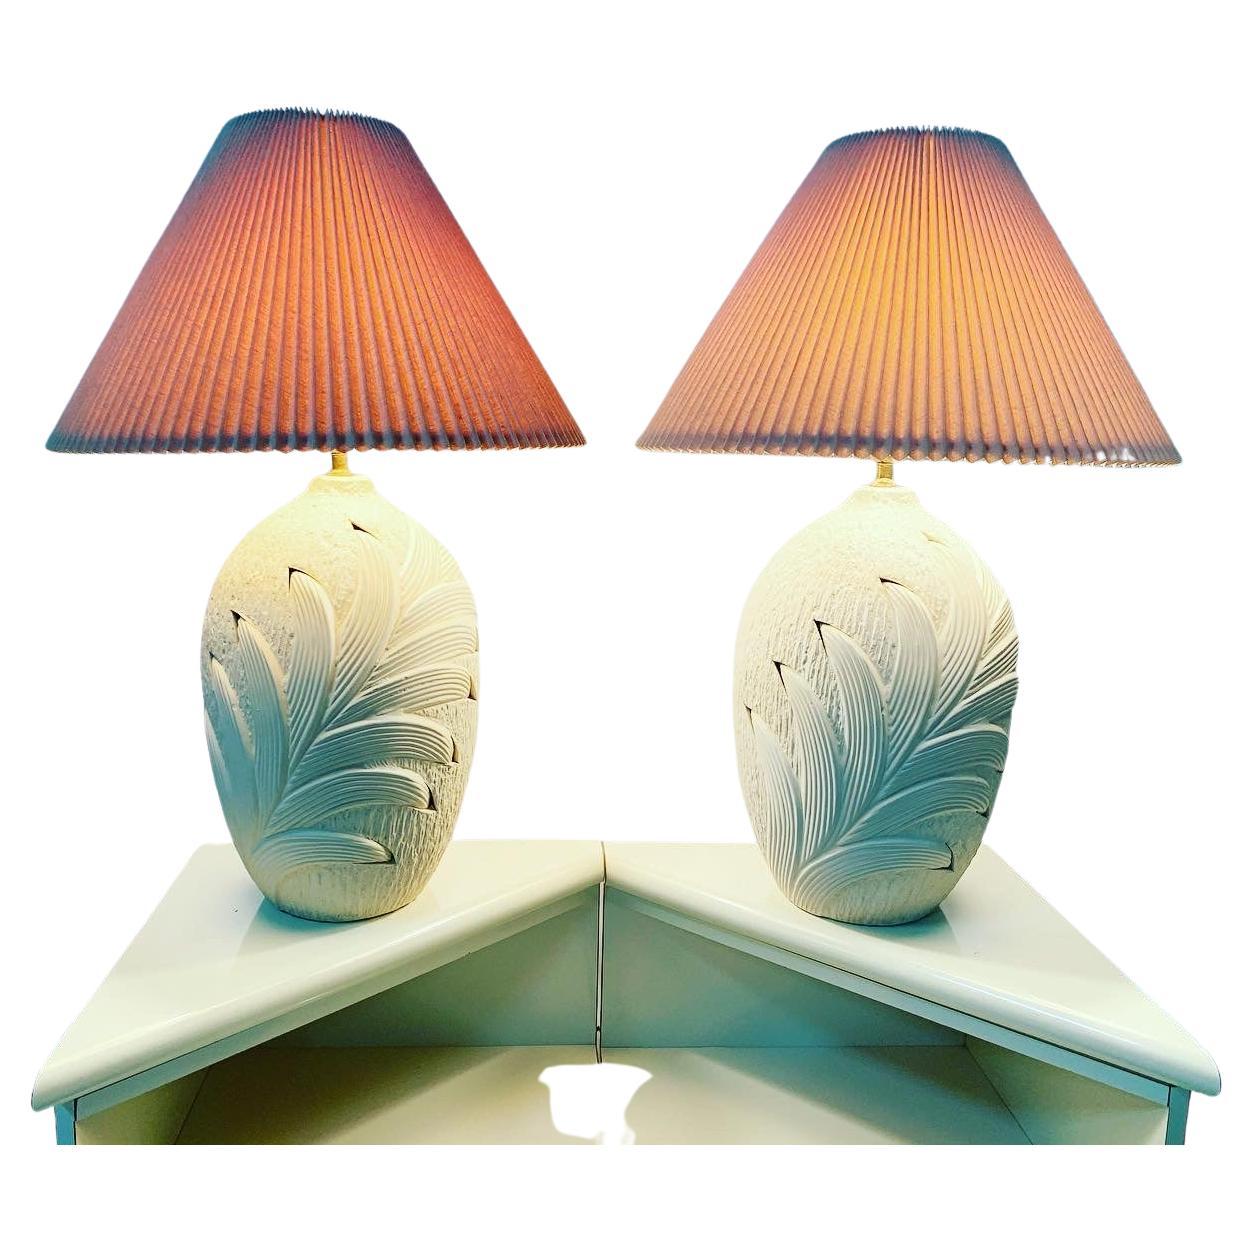 Coastal Style Plaster Palm Frond Leaf Table Lamps - a Pair For Sale